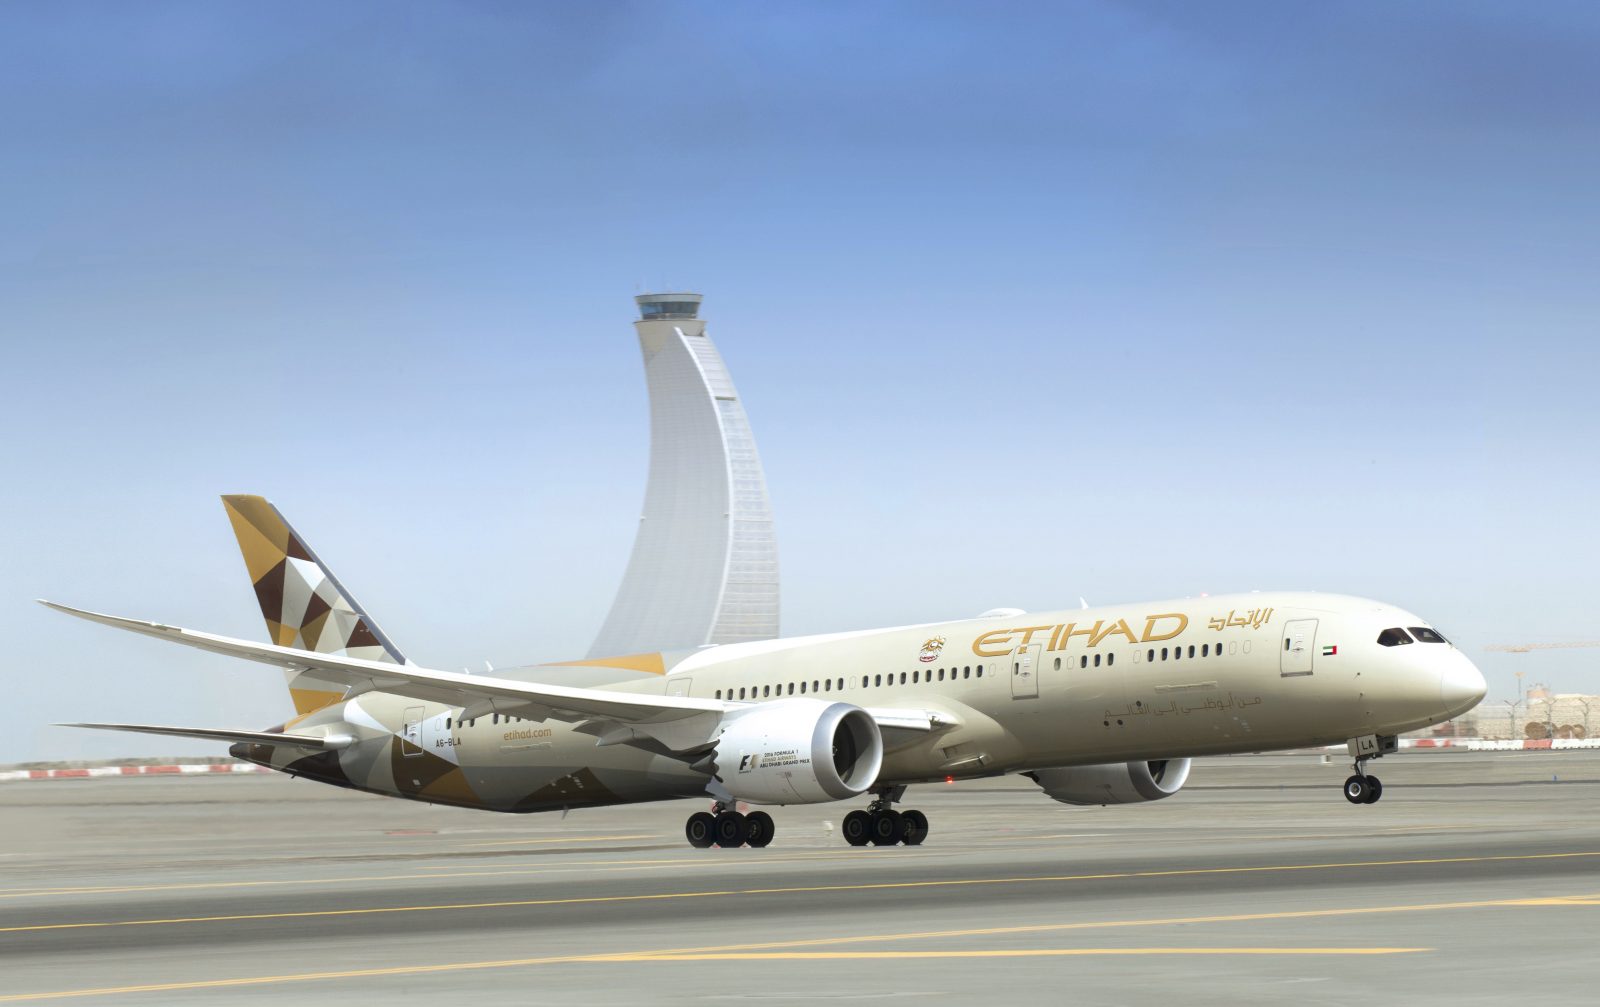 UAE Confirms Agreement With United States Over Emirates and Etihad: Says "Business as Usual"